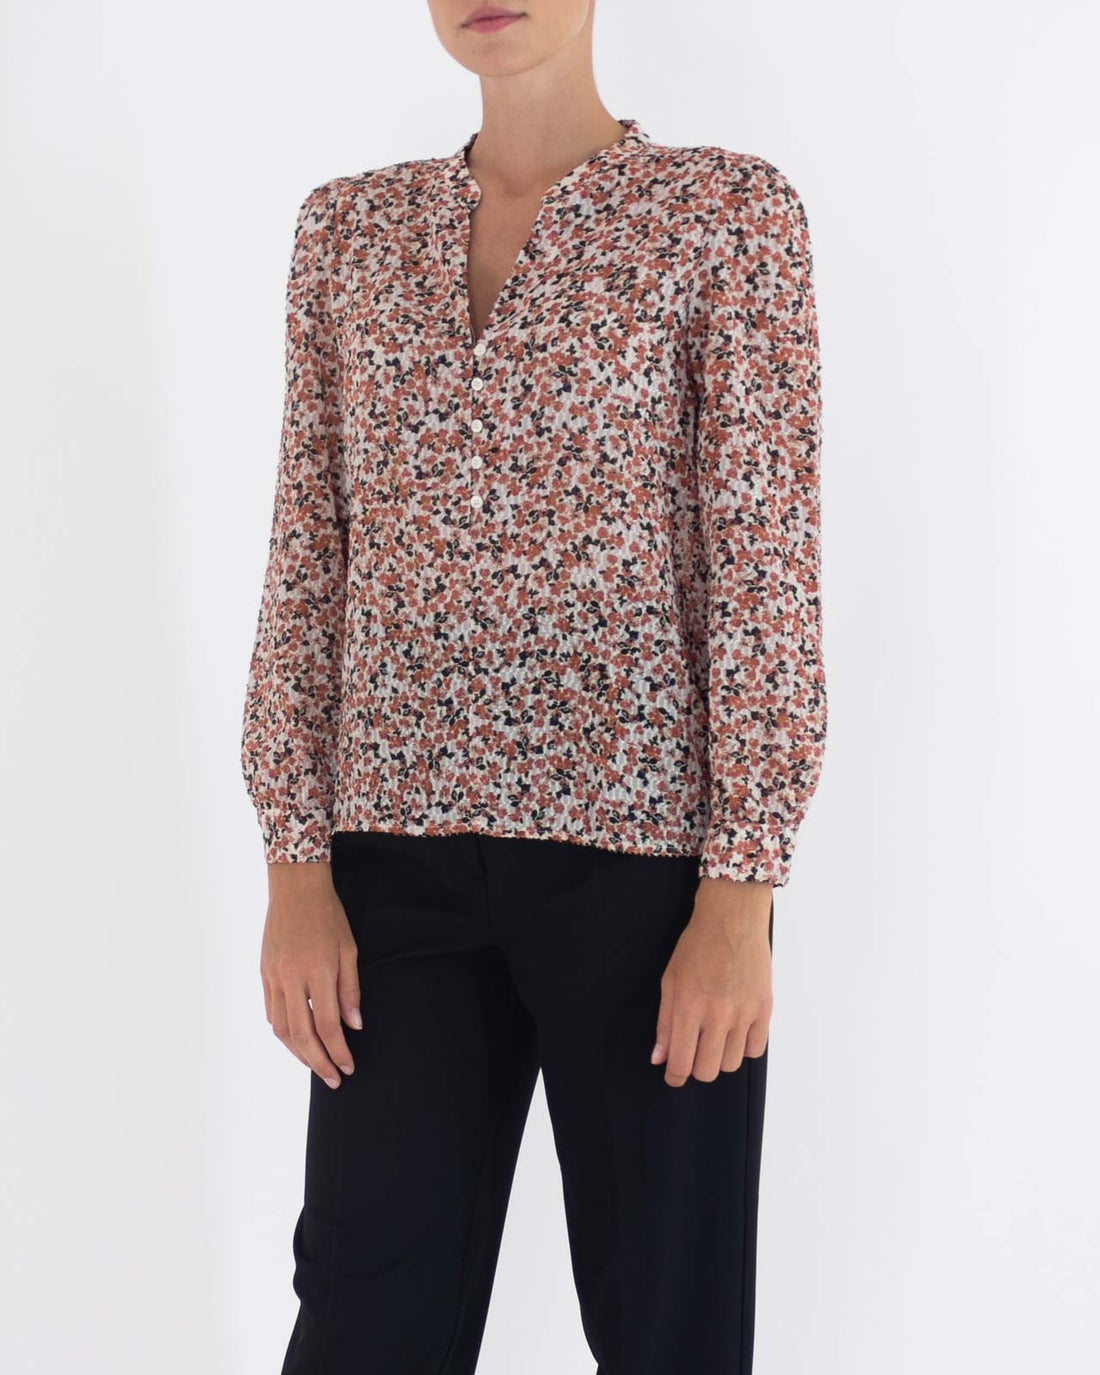 Micro flower patterned shirt - EMME Marella